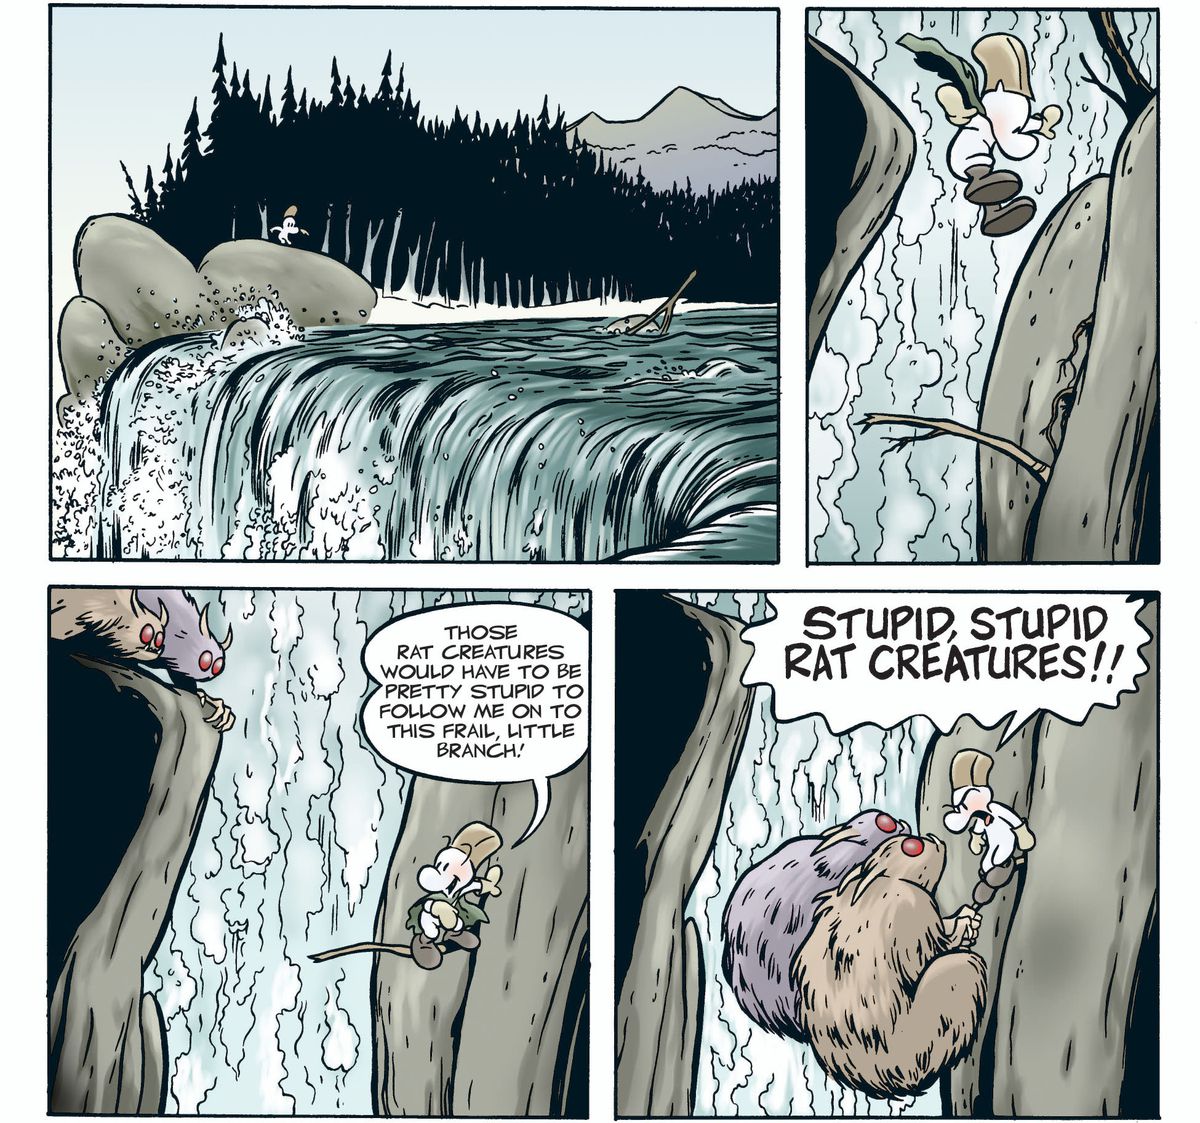 Fone Bone dashes up to a rushing winter waterfall, and leaps to a frail little branch jutting out from rocks near the flow. The monstrous rat creatures chasing him pause on a ledge. “Those rat creatures would have to be pretty stupid to follow me on to this frail little brain!” he exclaims. In the next panel, both huge rat creatures have leapt to the now severely bent branch, clinging to the end of it. “STUPID, STUPID RAT CREATURES!!” Fone yells in Bone.